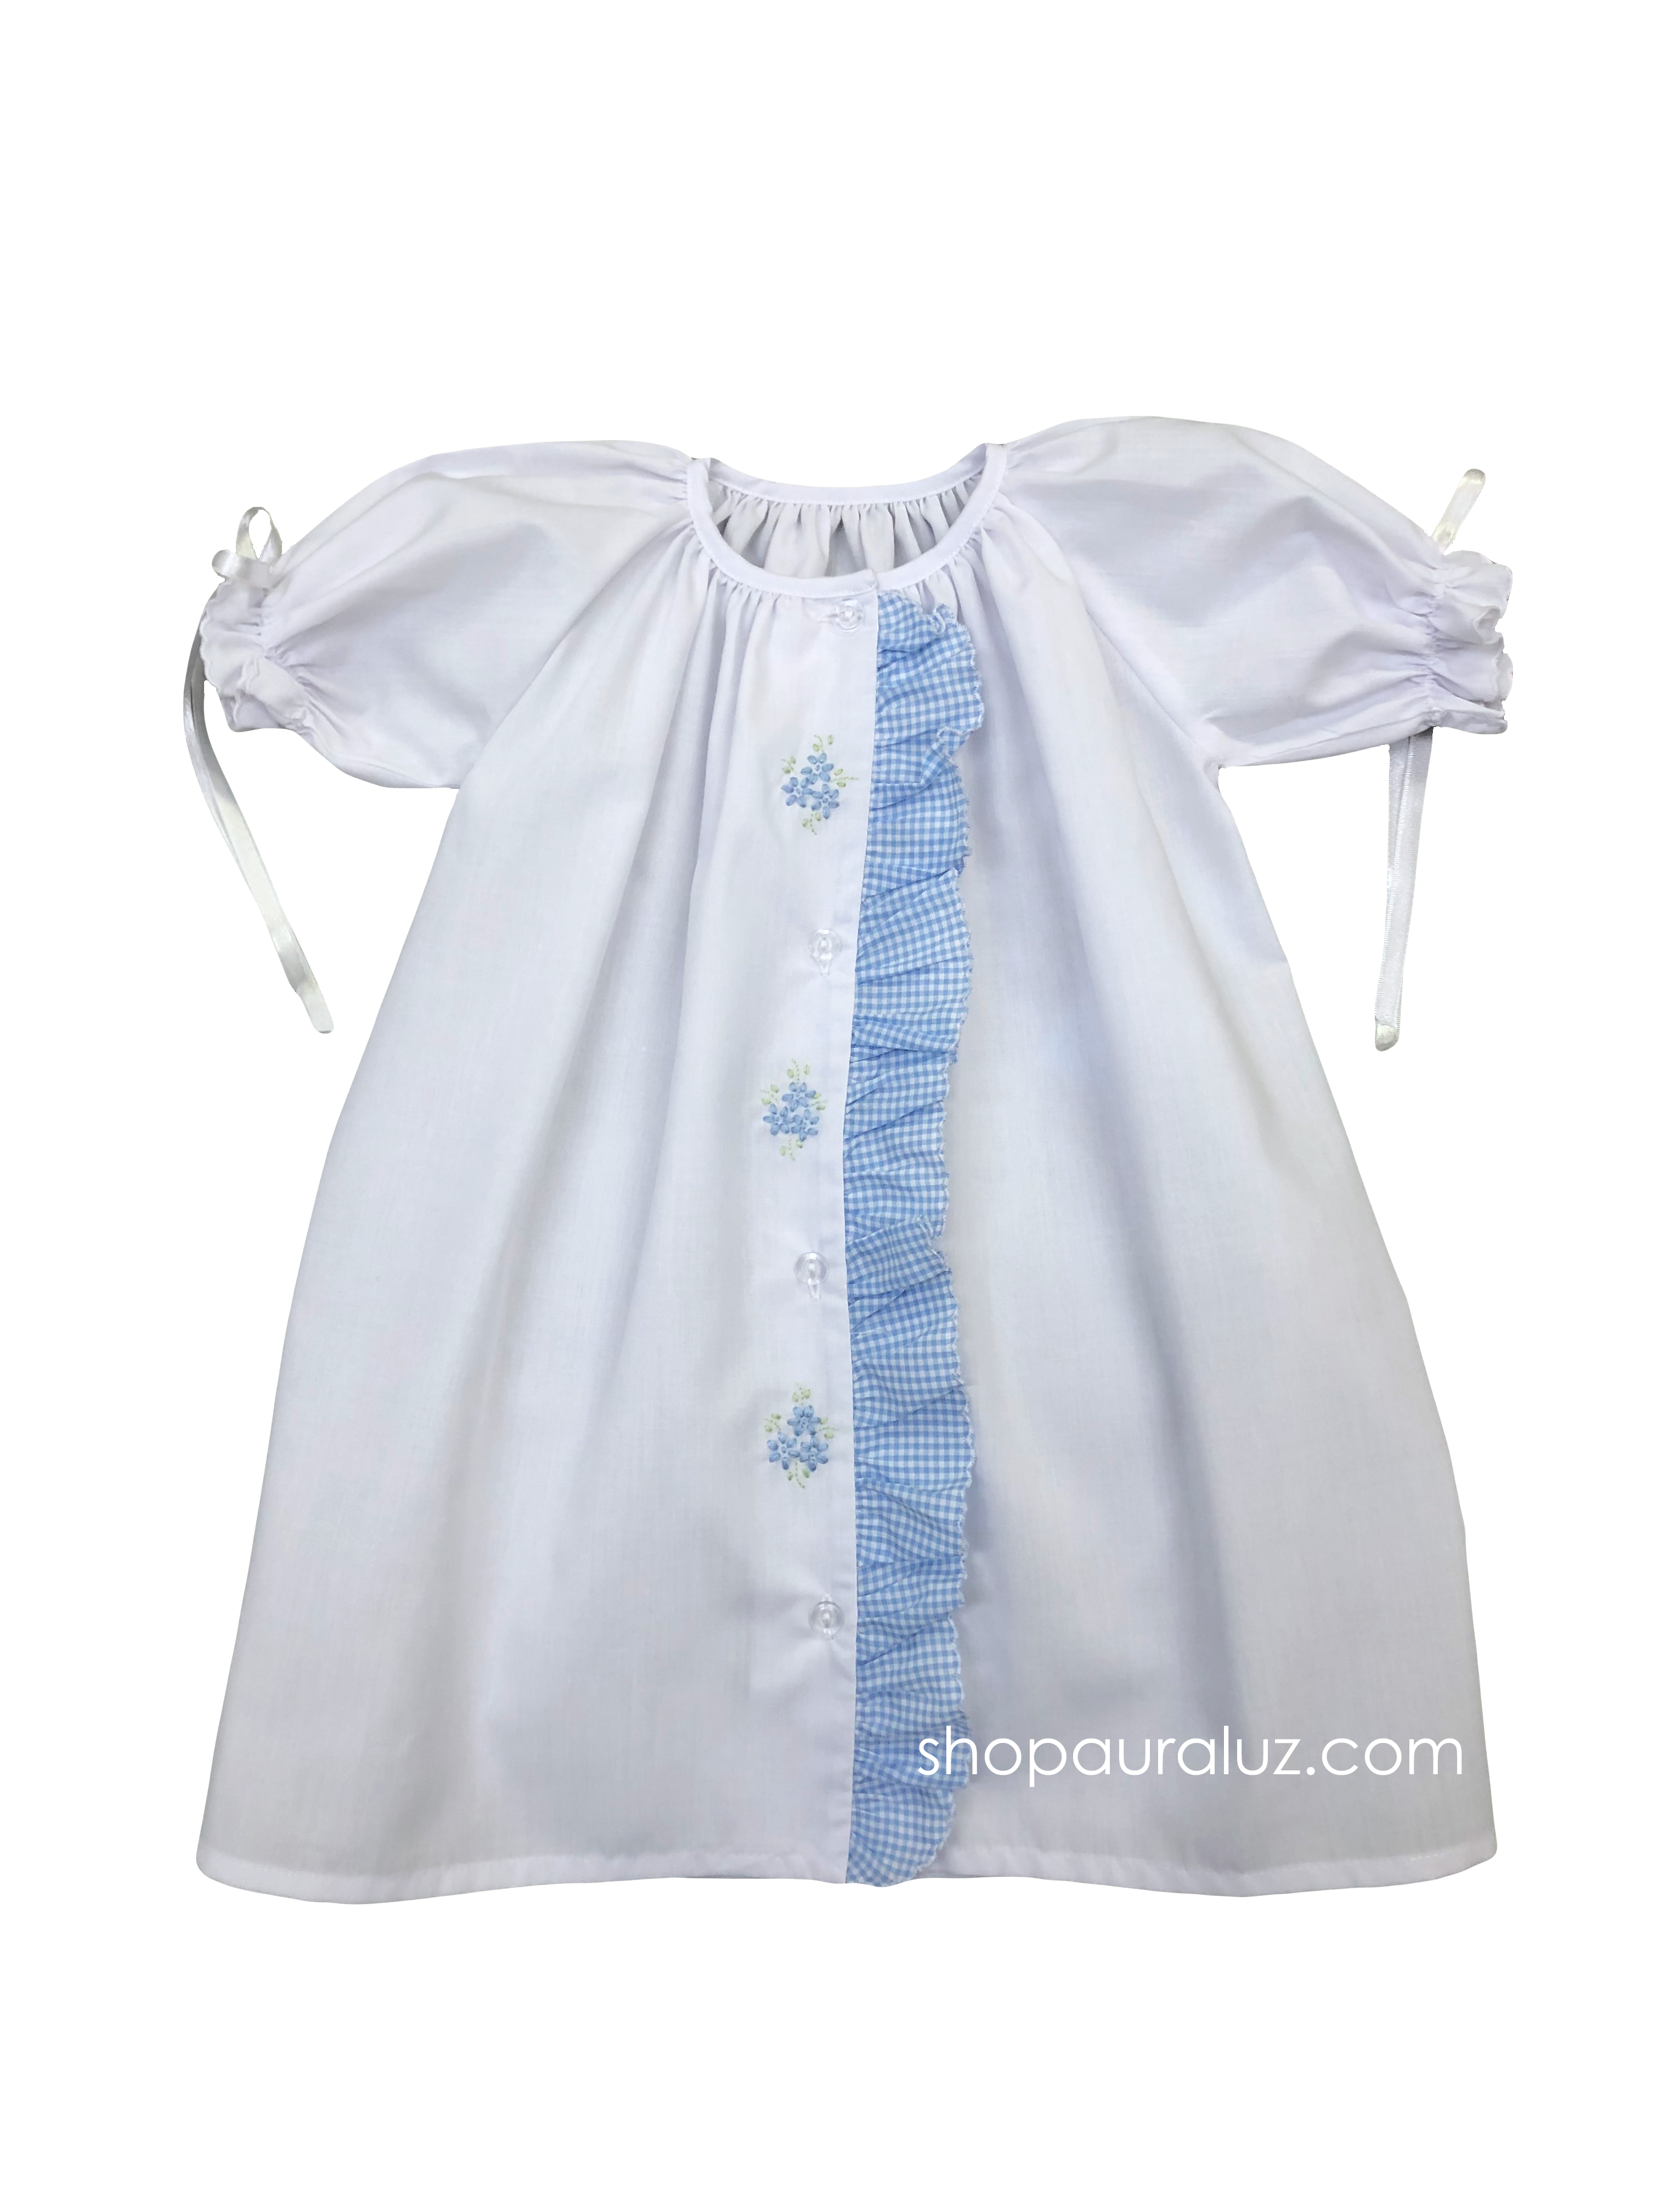 Auraluz Day Gown..White with blue check ruffle,ribbons and embroidered flowers